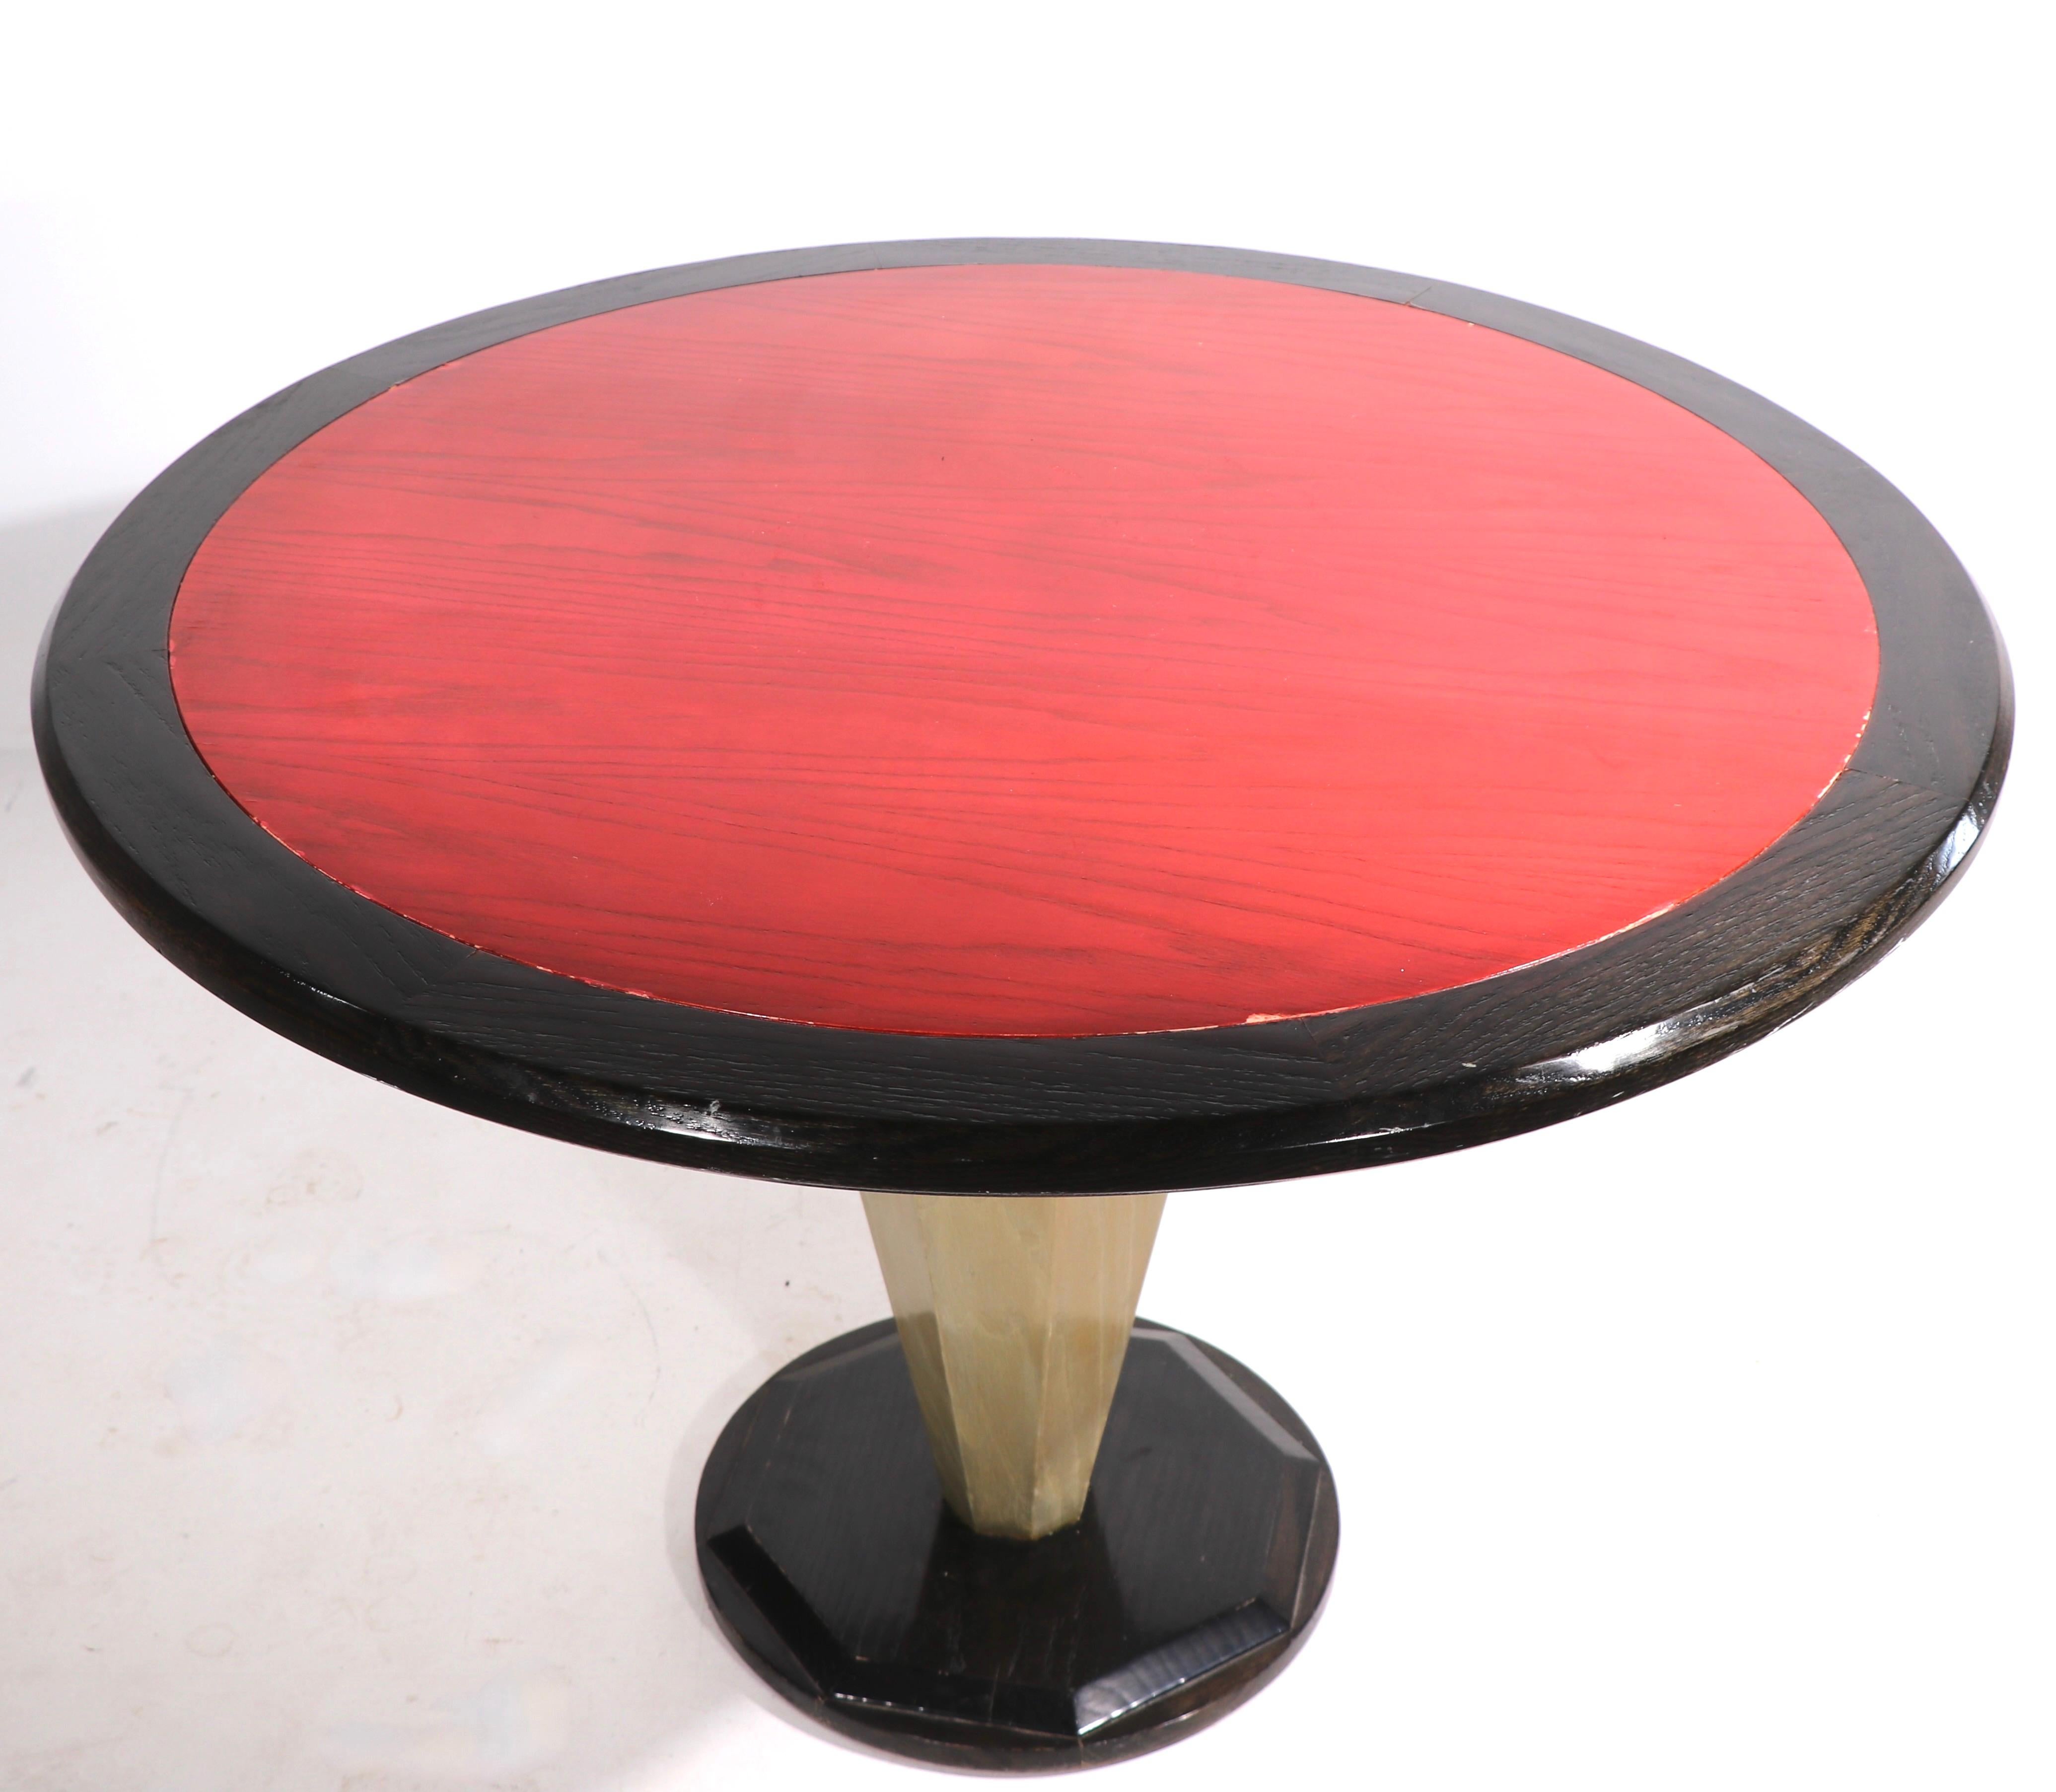 Chic round dining, or center, table having an octagonal tapering pedestal center post, which supports the circular top. The top has a red center, with contrasting back trim, the center post os a neutral tan, the stepped base is black. The table